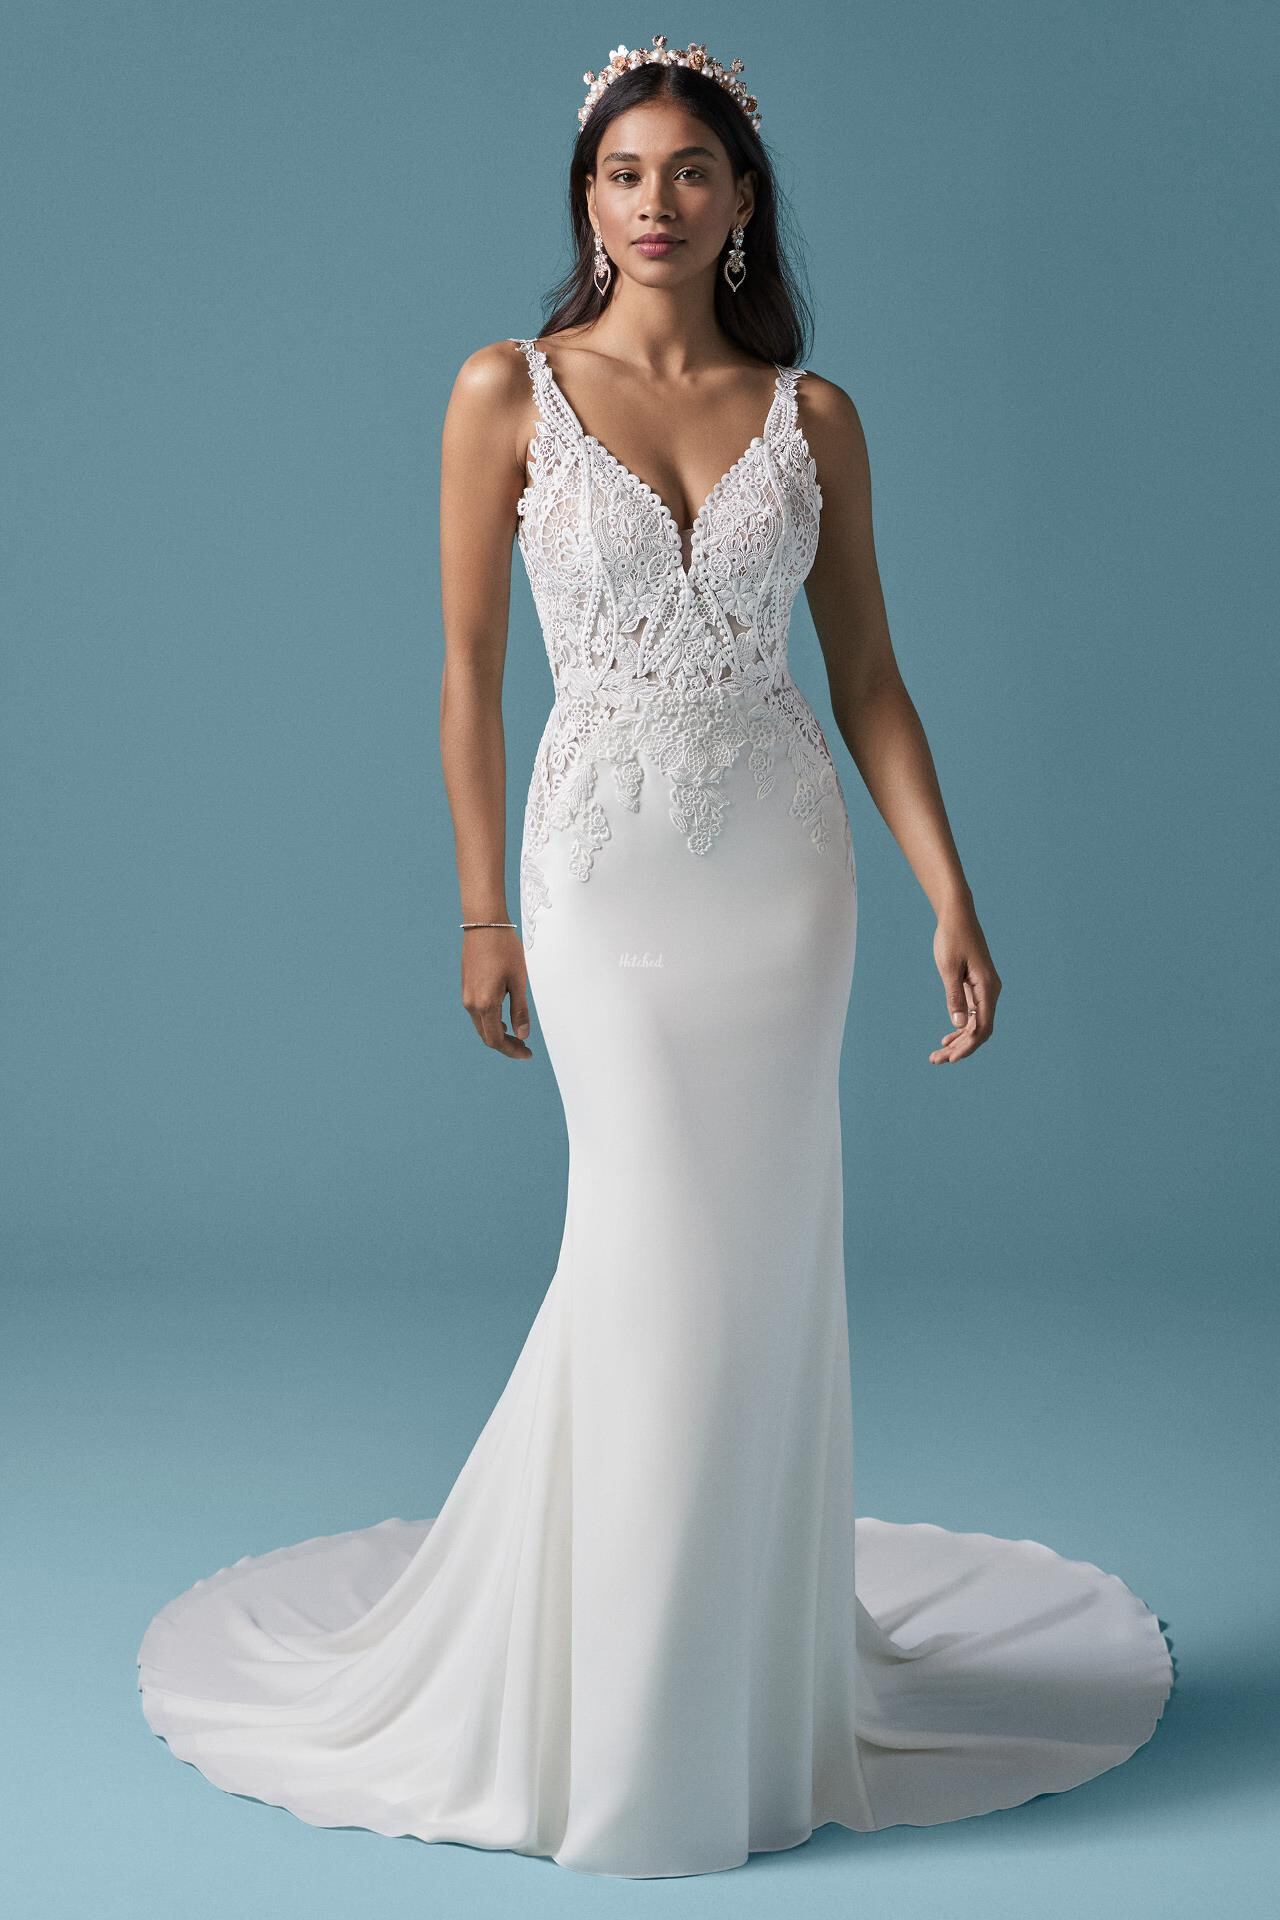 Amazing Maggie Sottero Short Wedding Dresses  The ultimate guide 